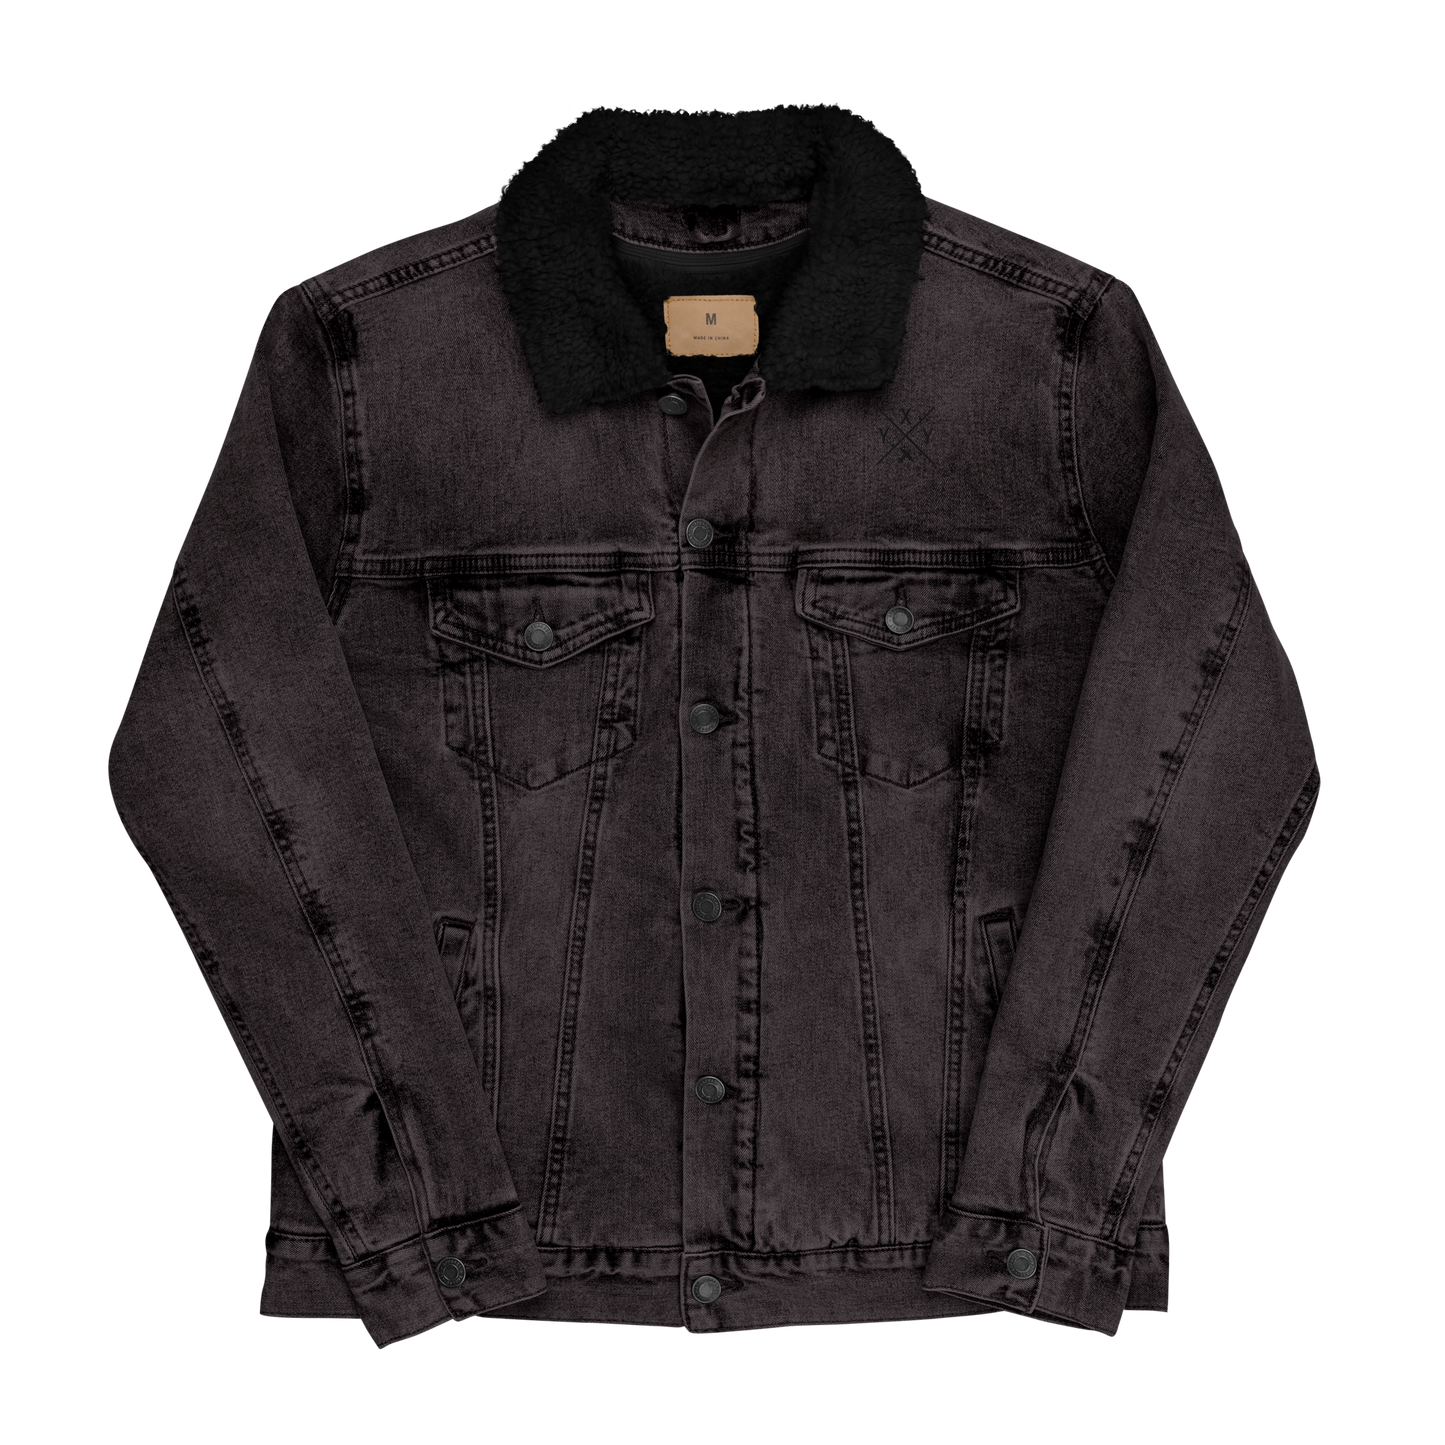 YHM Designs - YXY Whitehorse Denim Sherpa Jacket - Crossed-X Design with Airport Code and Vintage Propliner - Black & White Embroidery - Image 02